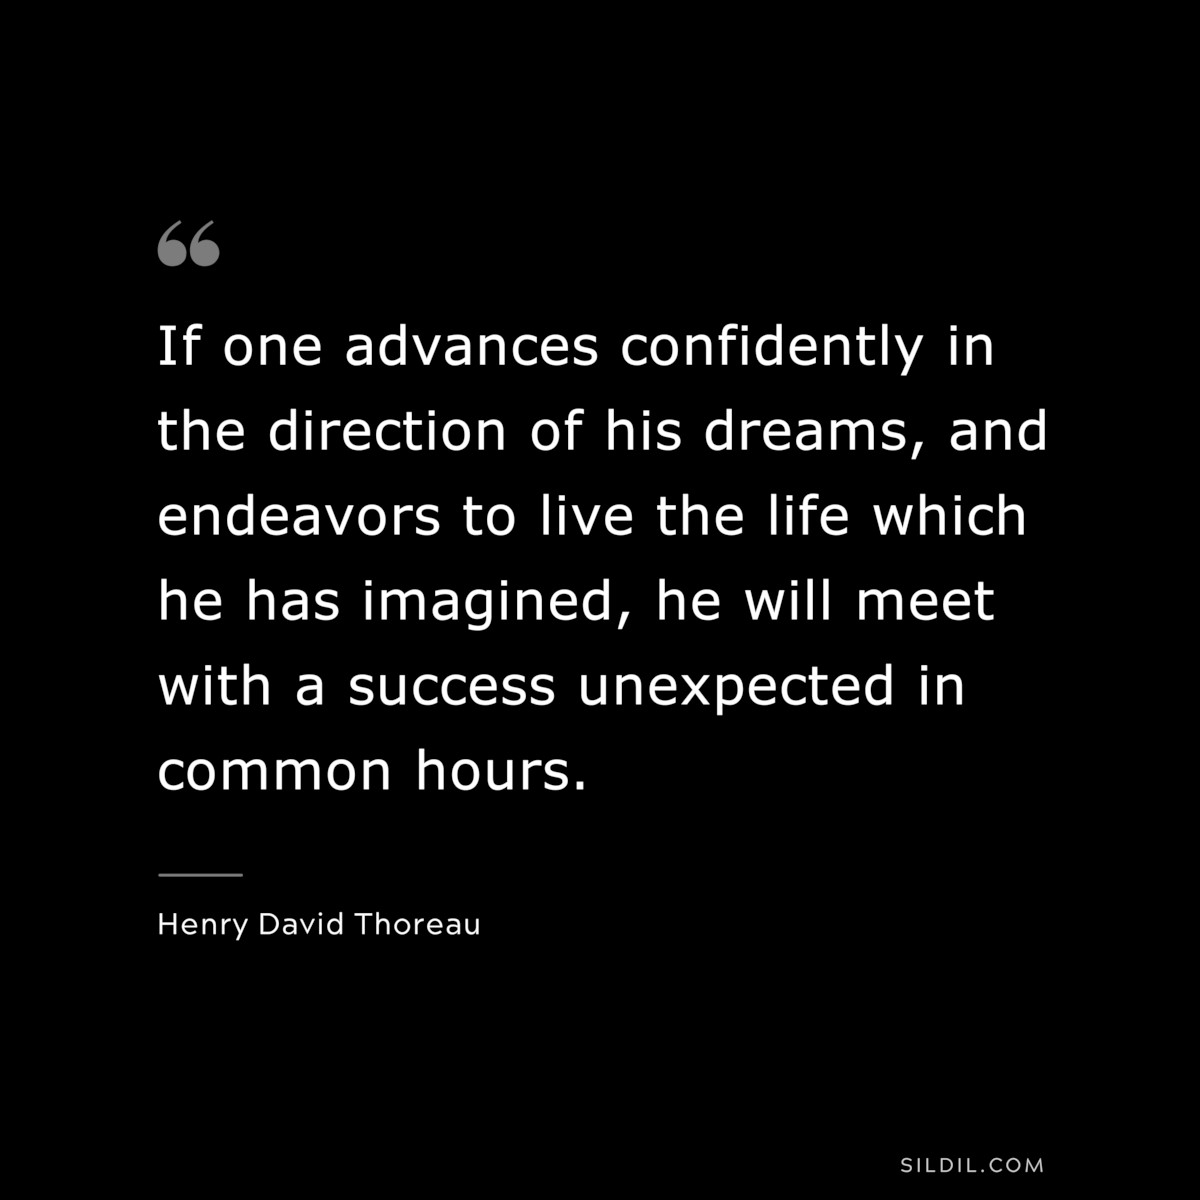 If one advances confidently in the direction of his dreams, and endeavors to live the life which he has imagined, he will meet with a success unexpected in common hours. — Henry David Thoreau